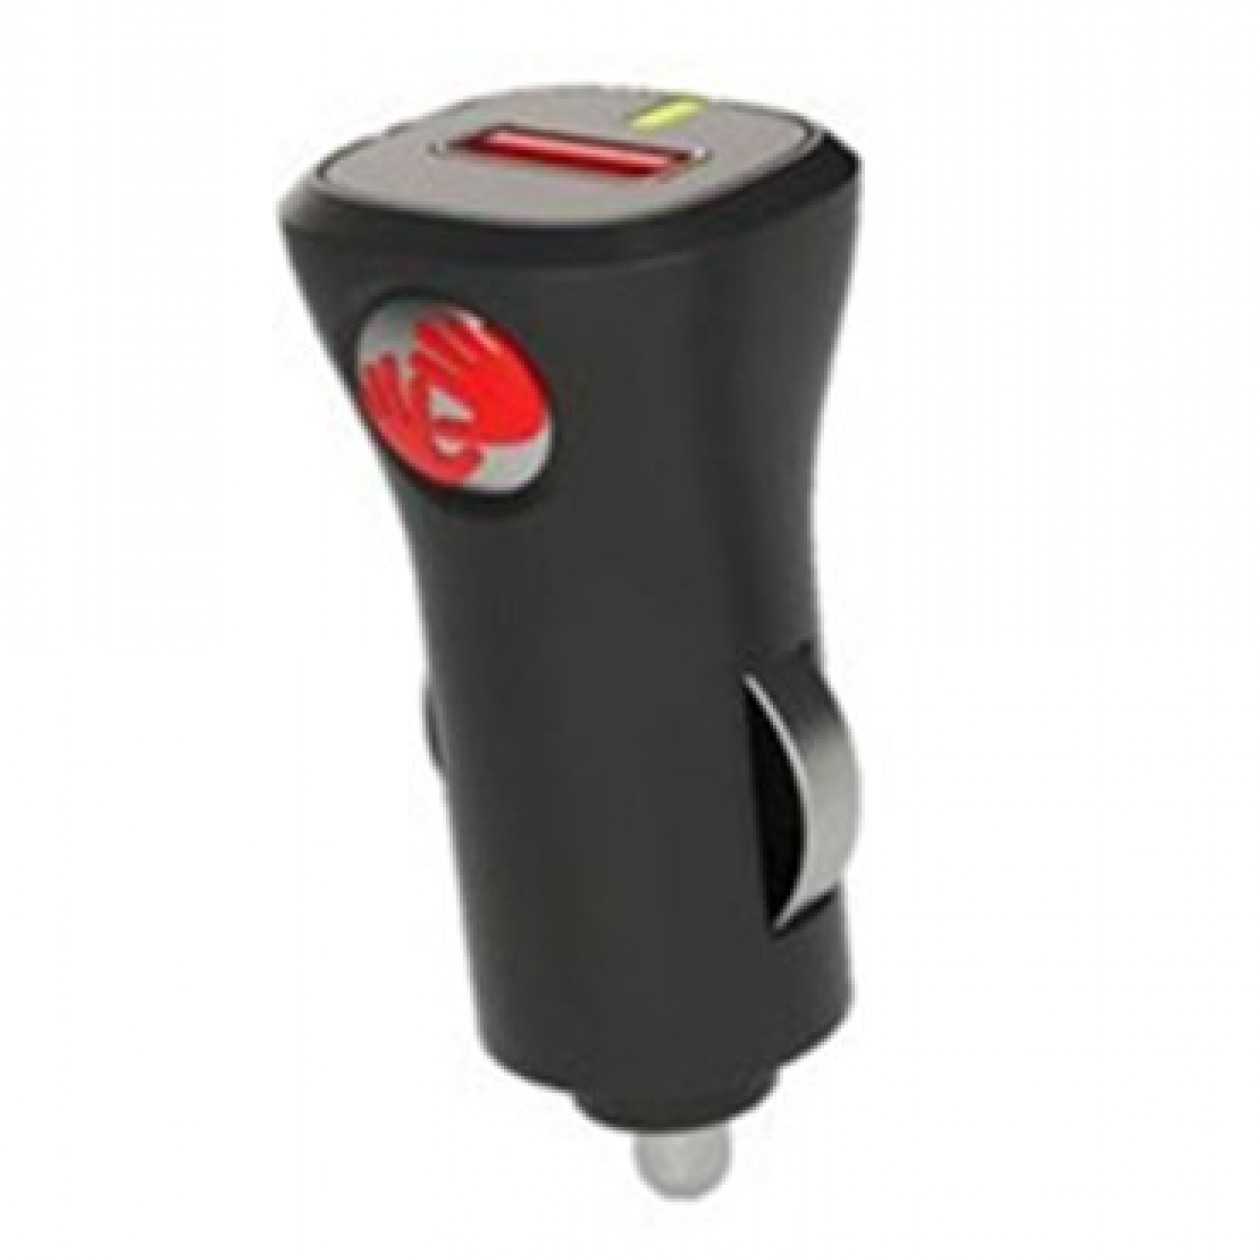 TomTom Universal High Speed in Car Charger for iPod/iPhone/Smartphone